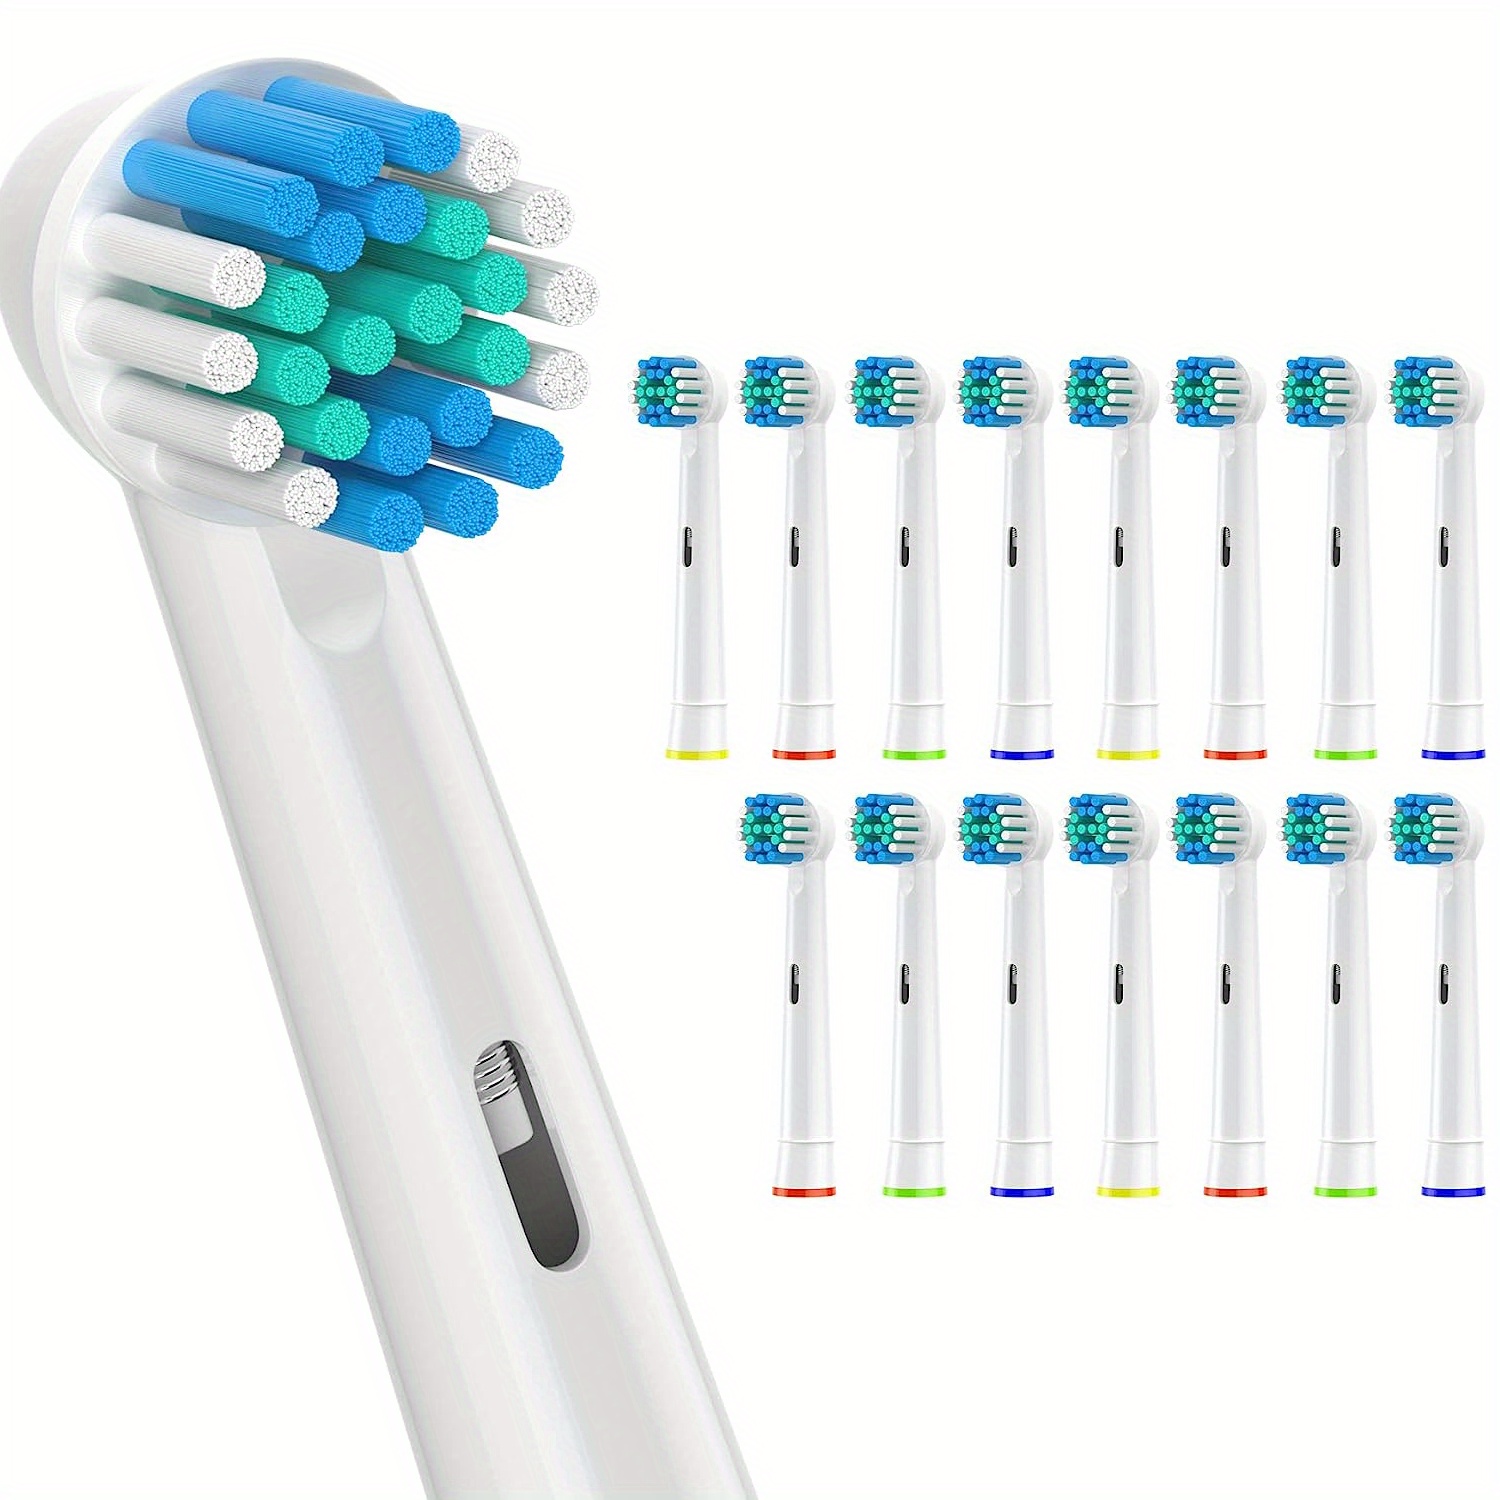 8 Pack Replacement Brush Heads Compatible Toothbrush Heads for Braun Oral-B  Professional Care 500 600 1000 2000 2500 3000 5000 7000 and More Vitality